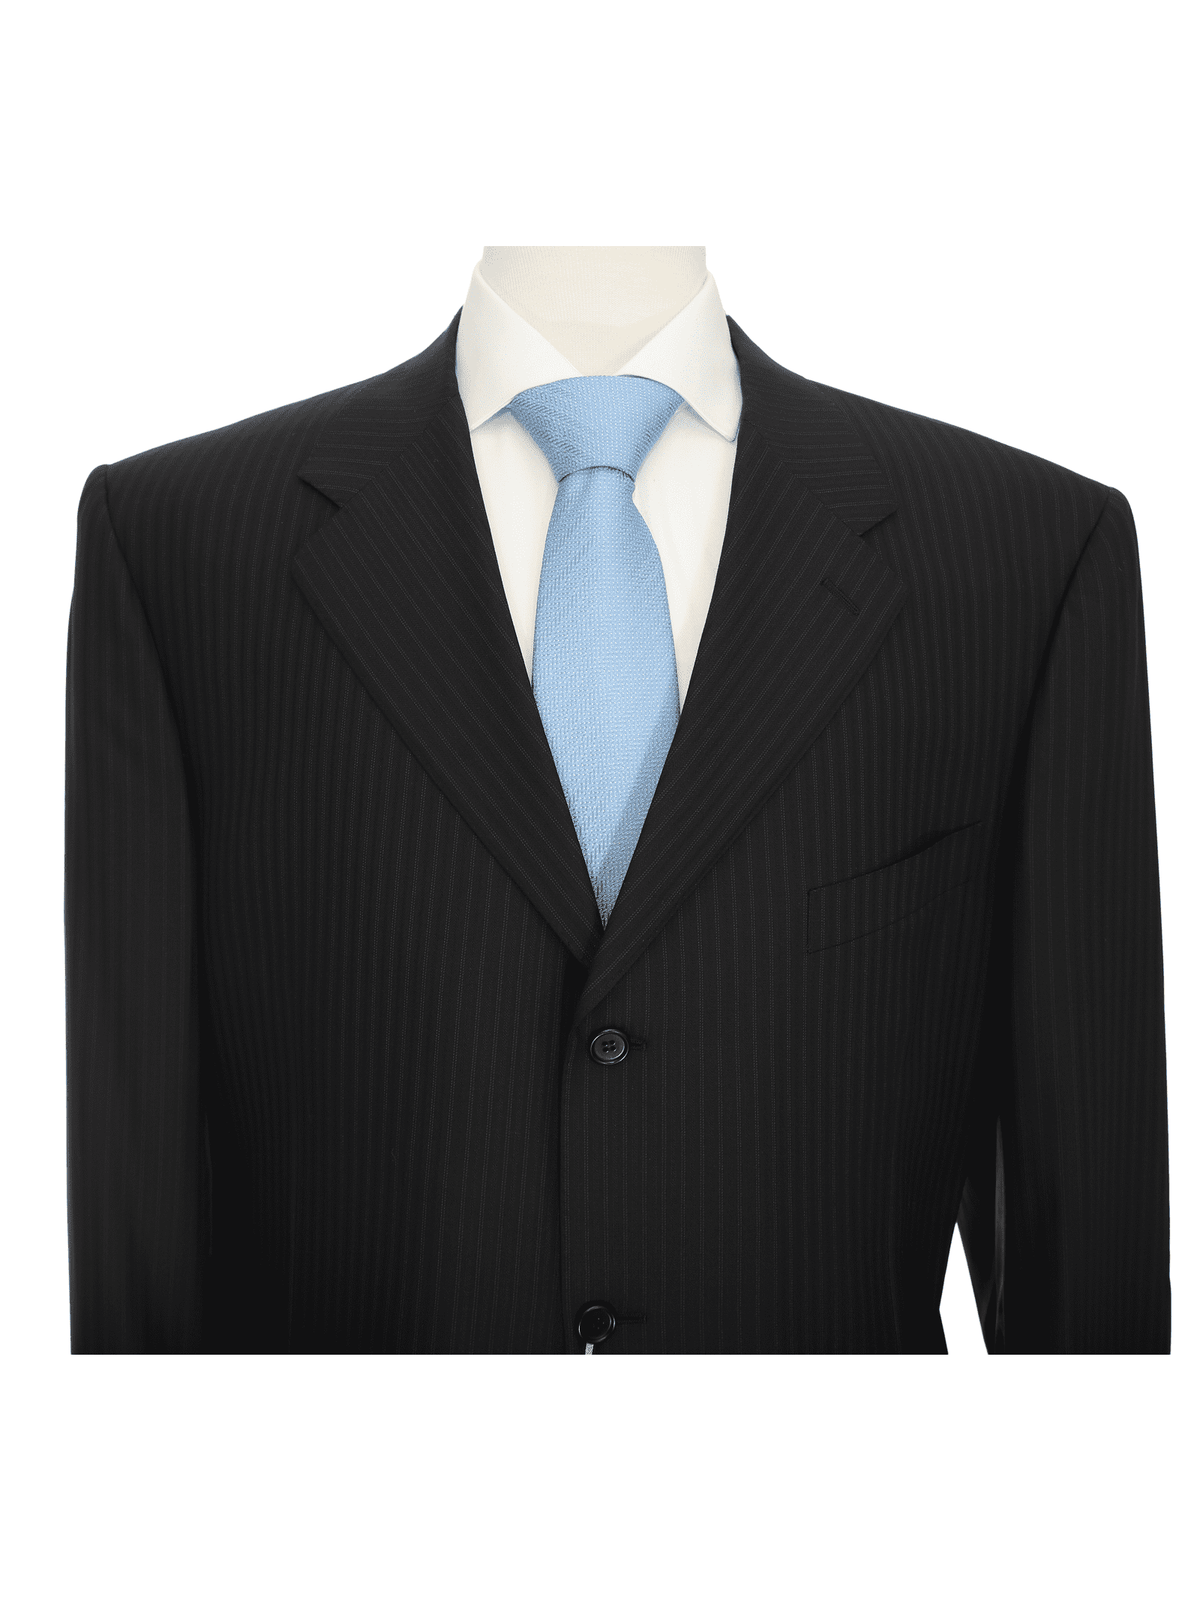 Canali SUITS Canali Mens 50l 62 Drop 6 Classic Fit Black Striped Three Button 100% Wool Suit